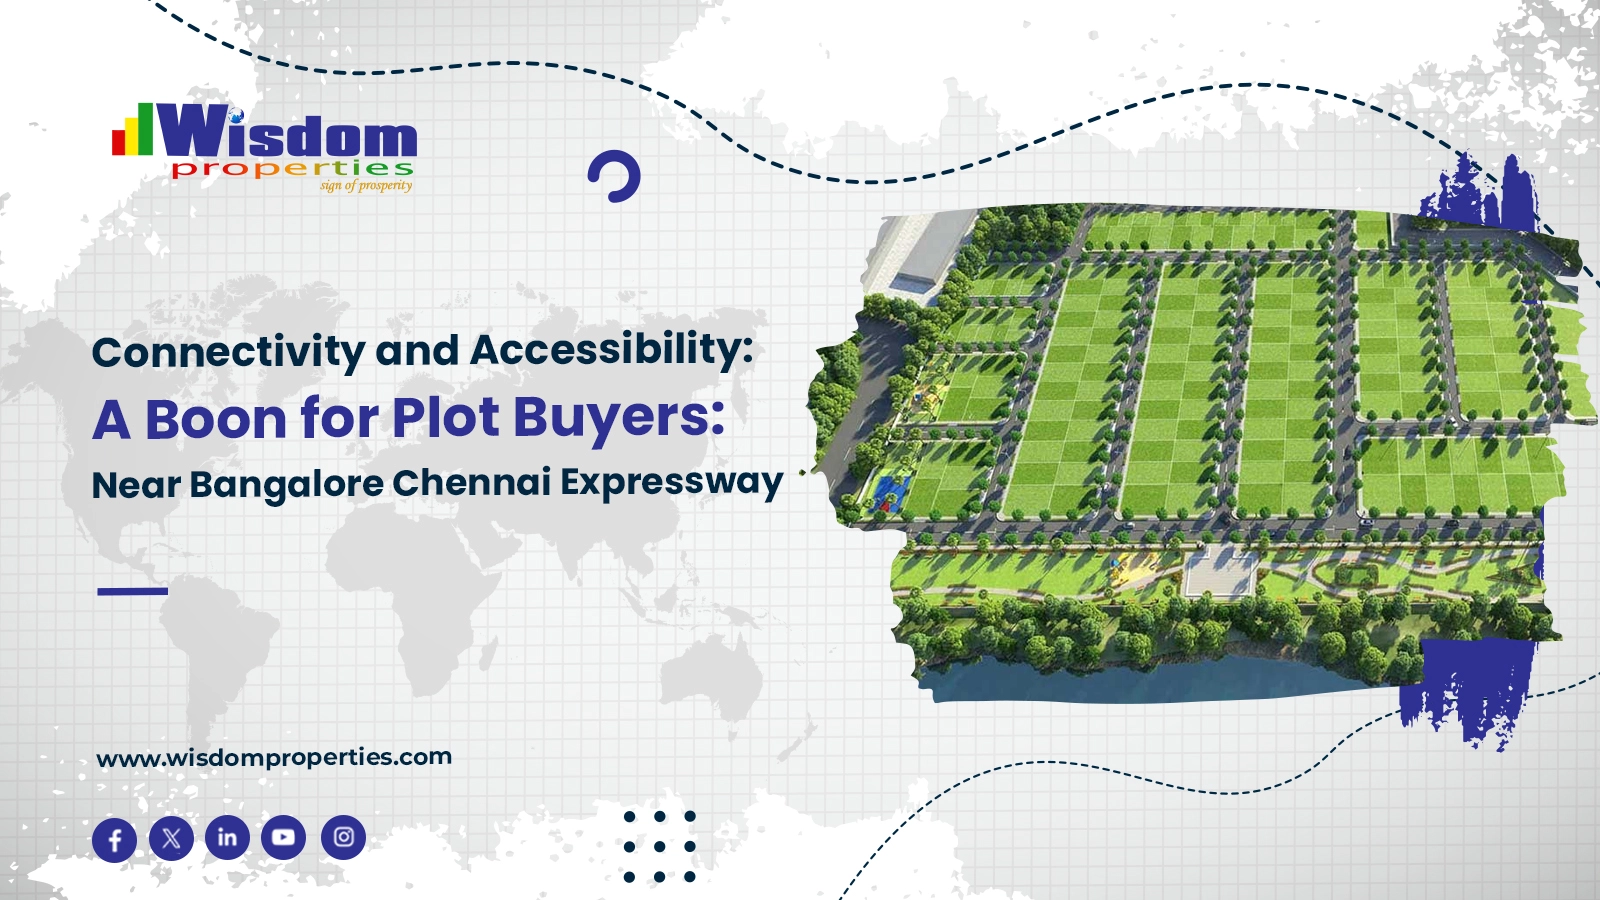 Connectivity and Accessibility: A Boon for Plot Buyers: Near Bangalore Chennai Expressway